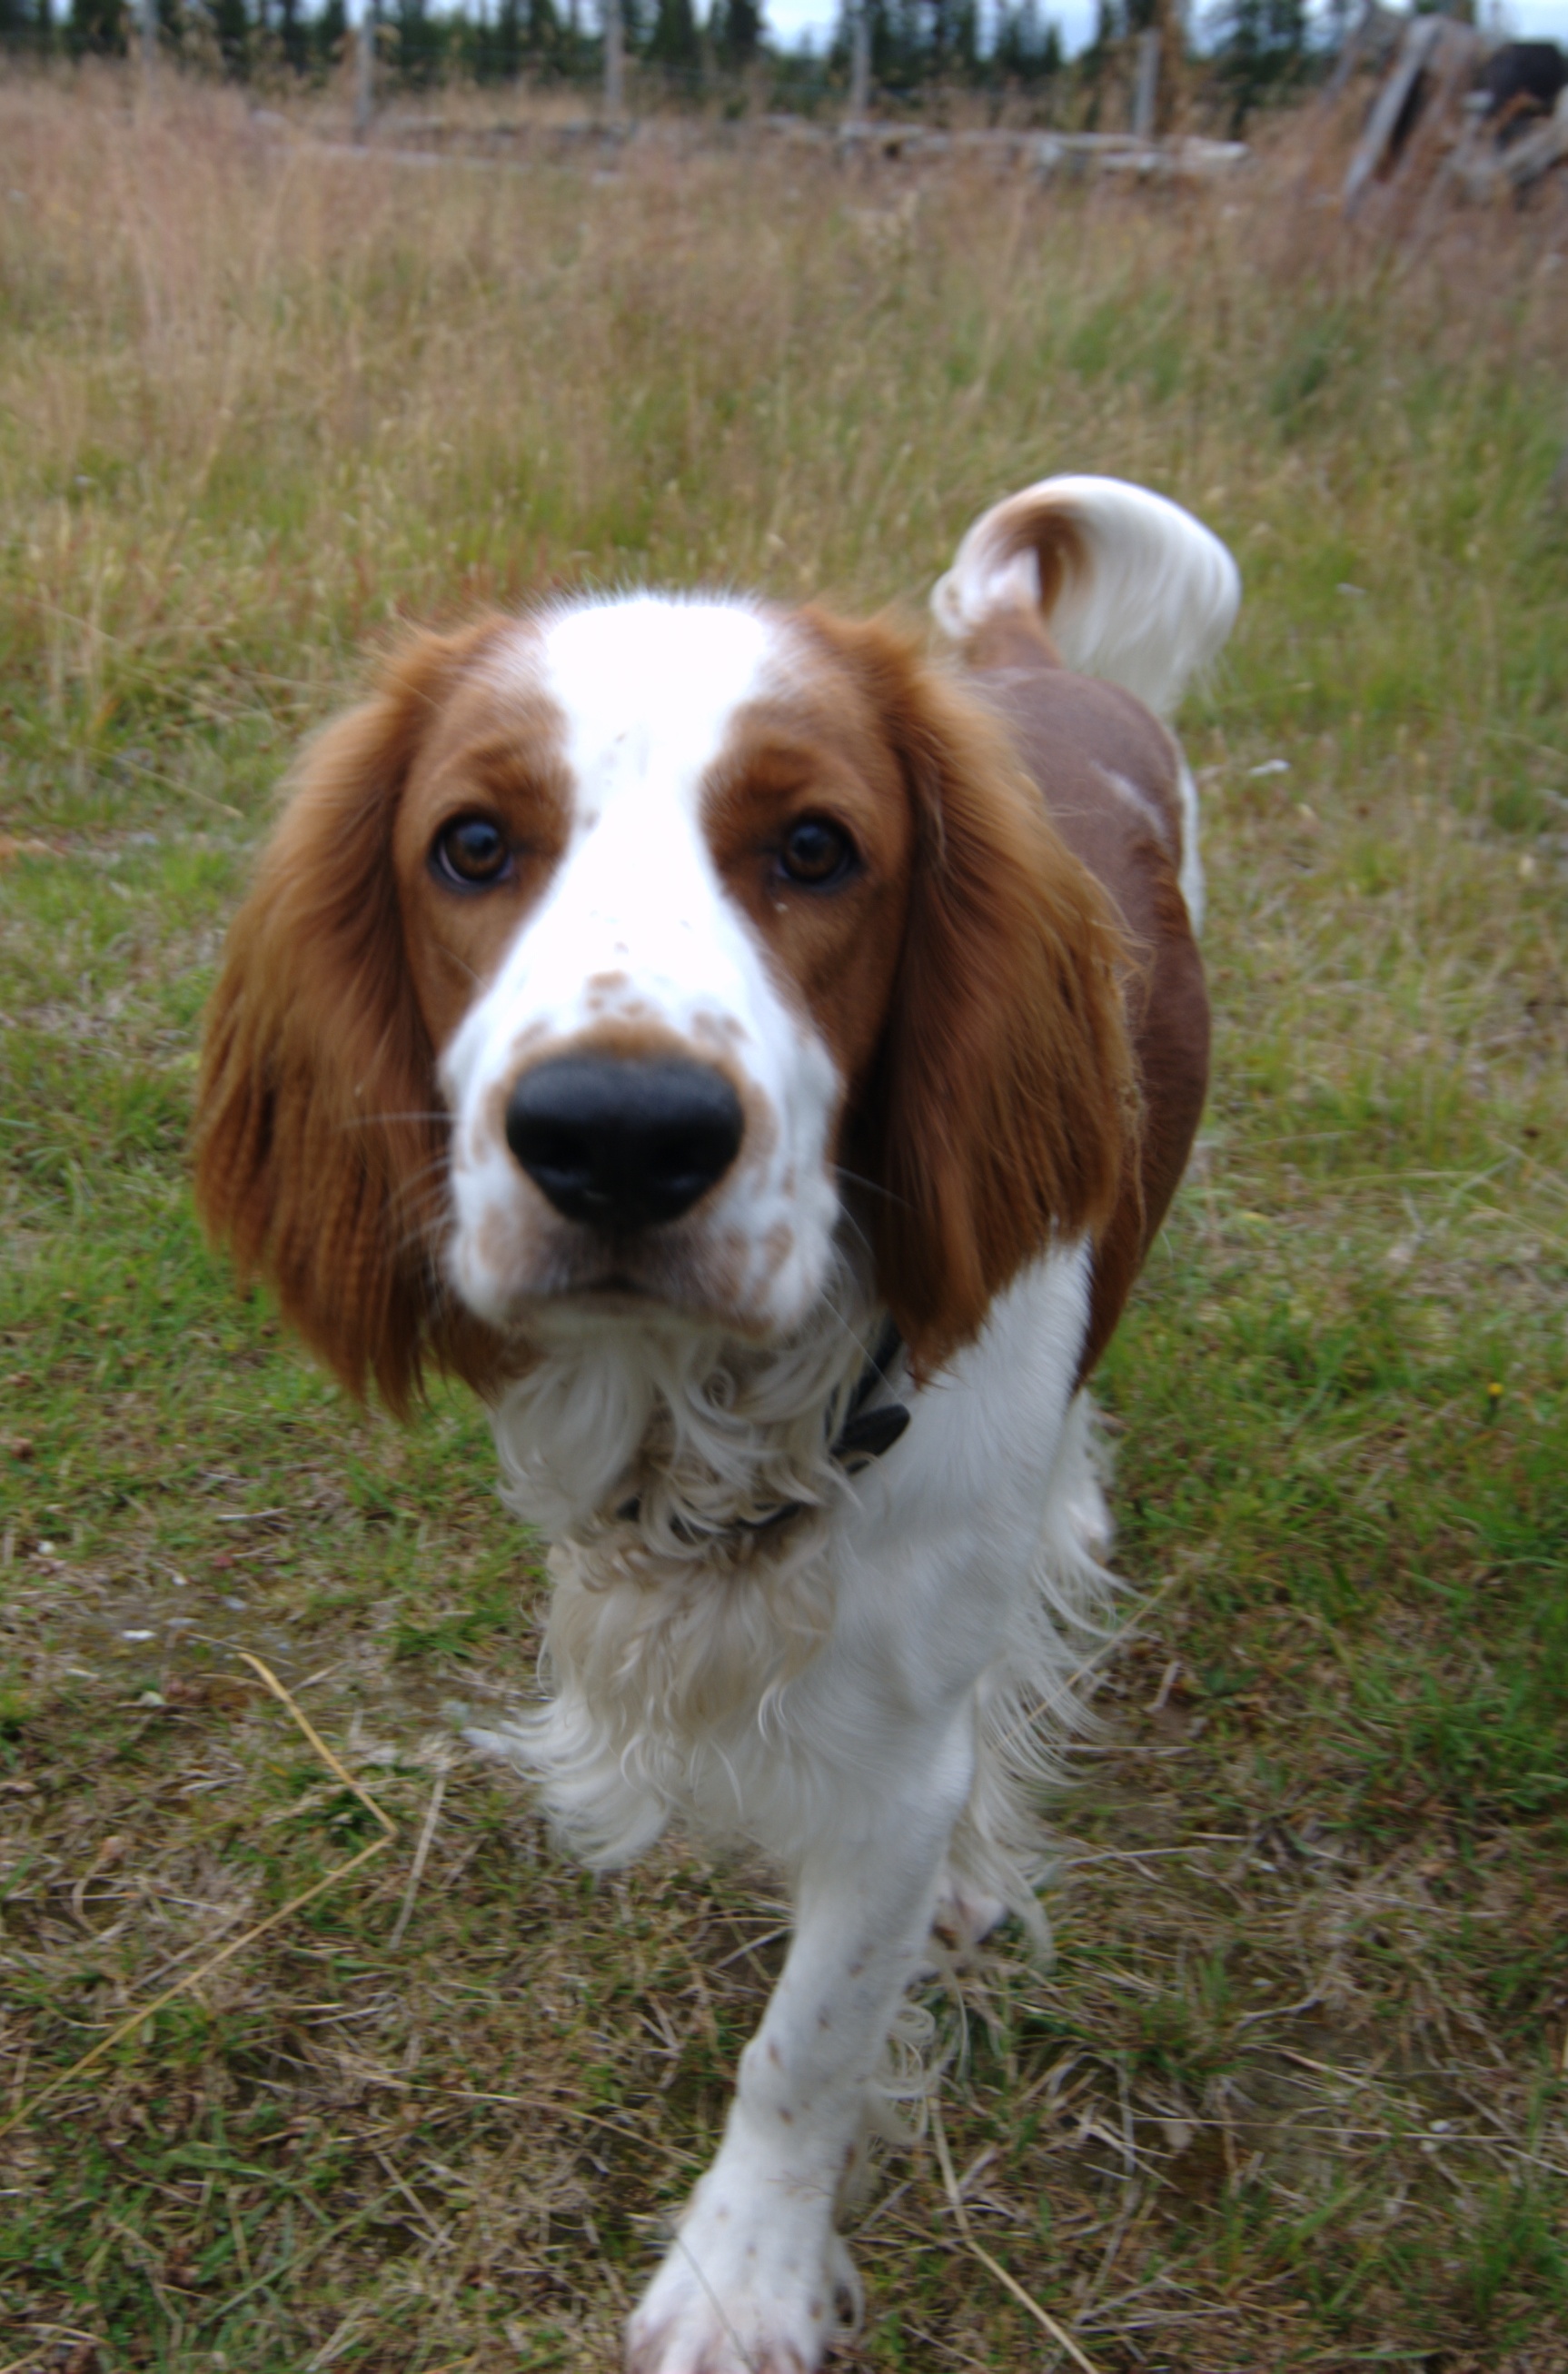 What are some interesting facts about Springer spaniels?